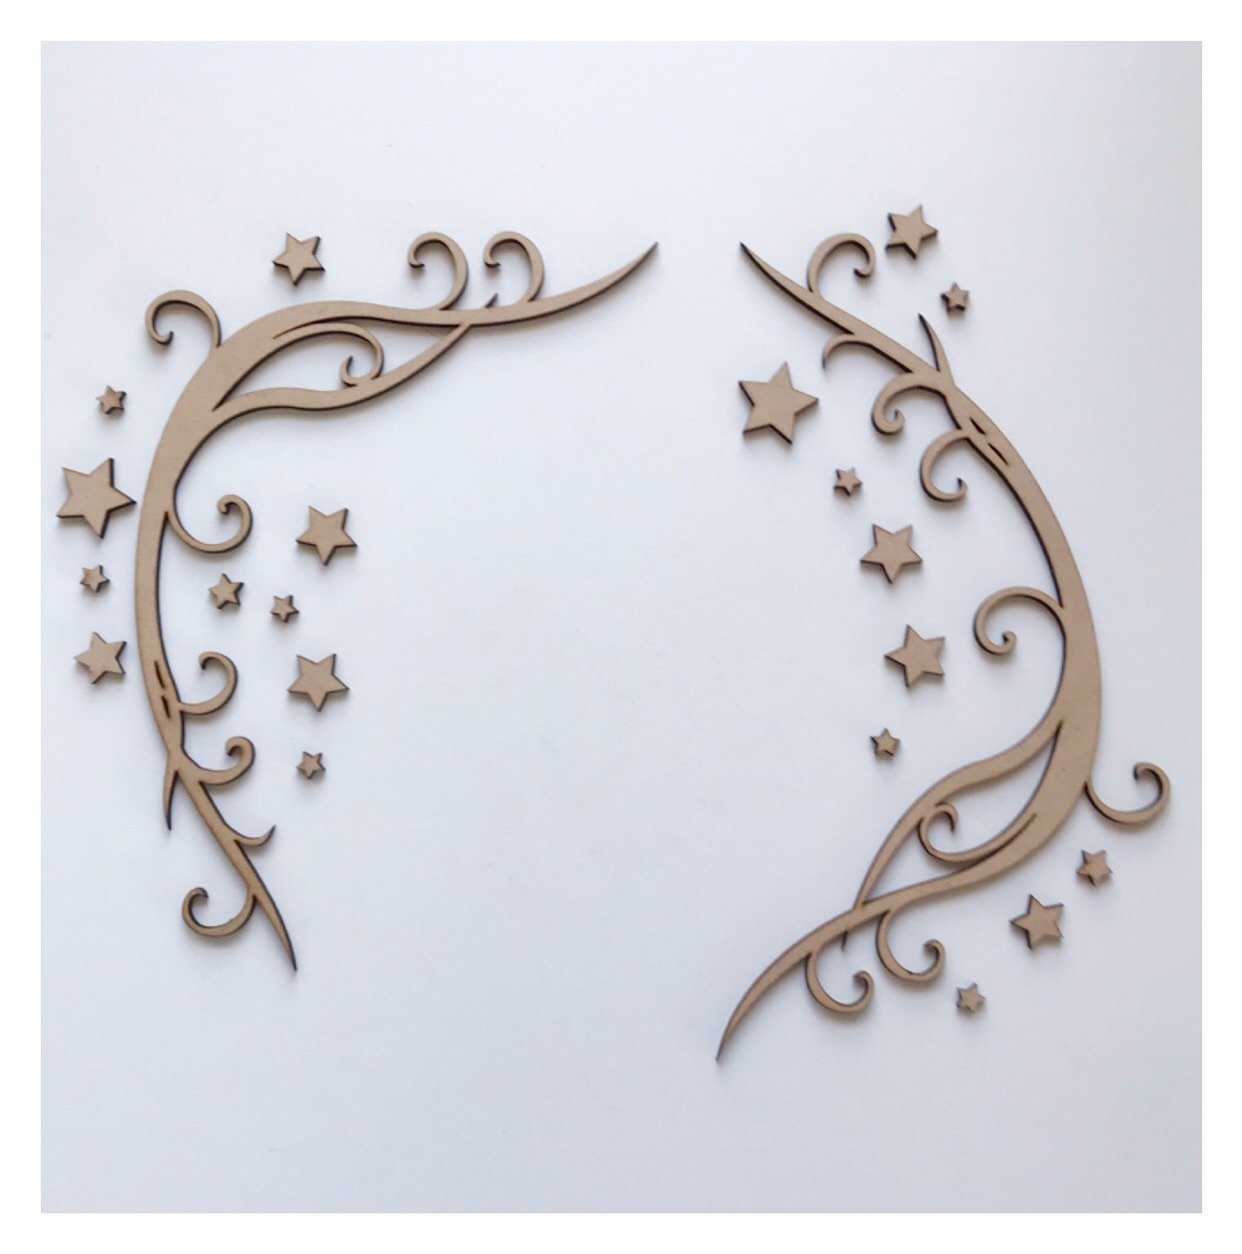 Decorative Scroll with Stars Border MDF Wooden